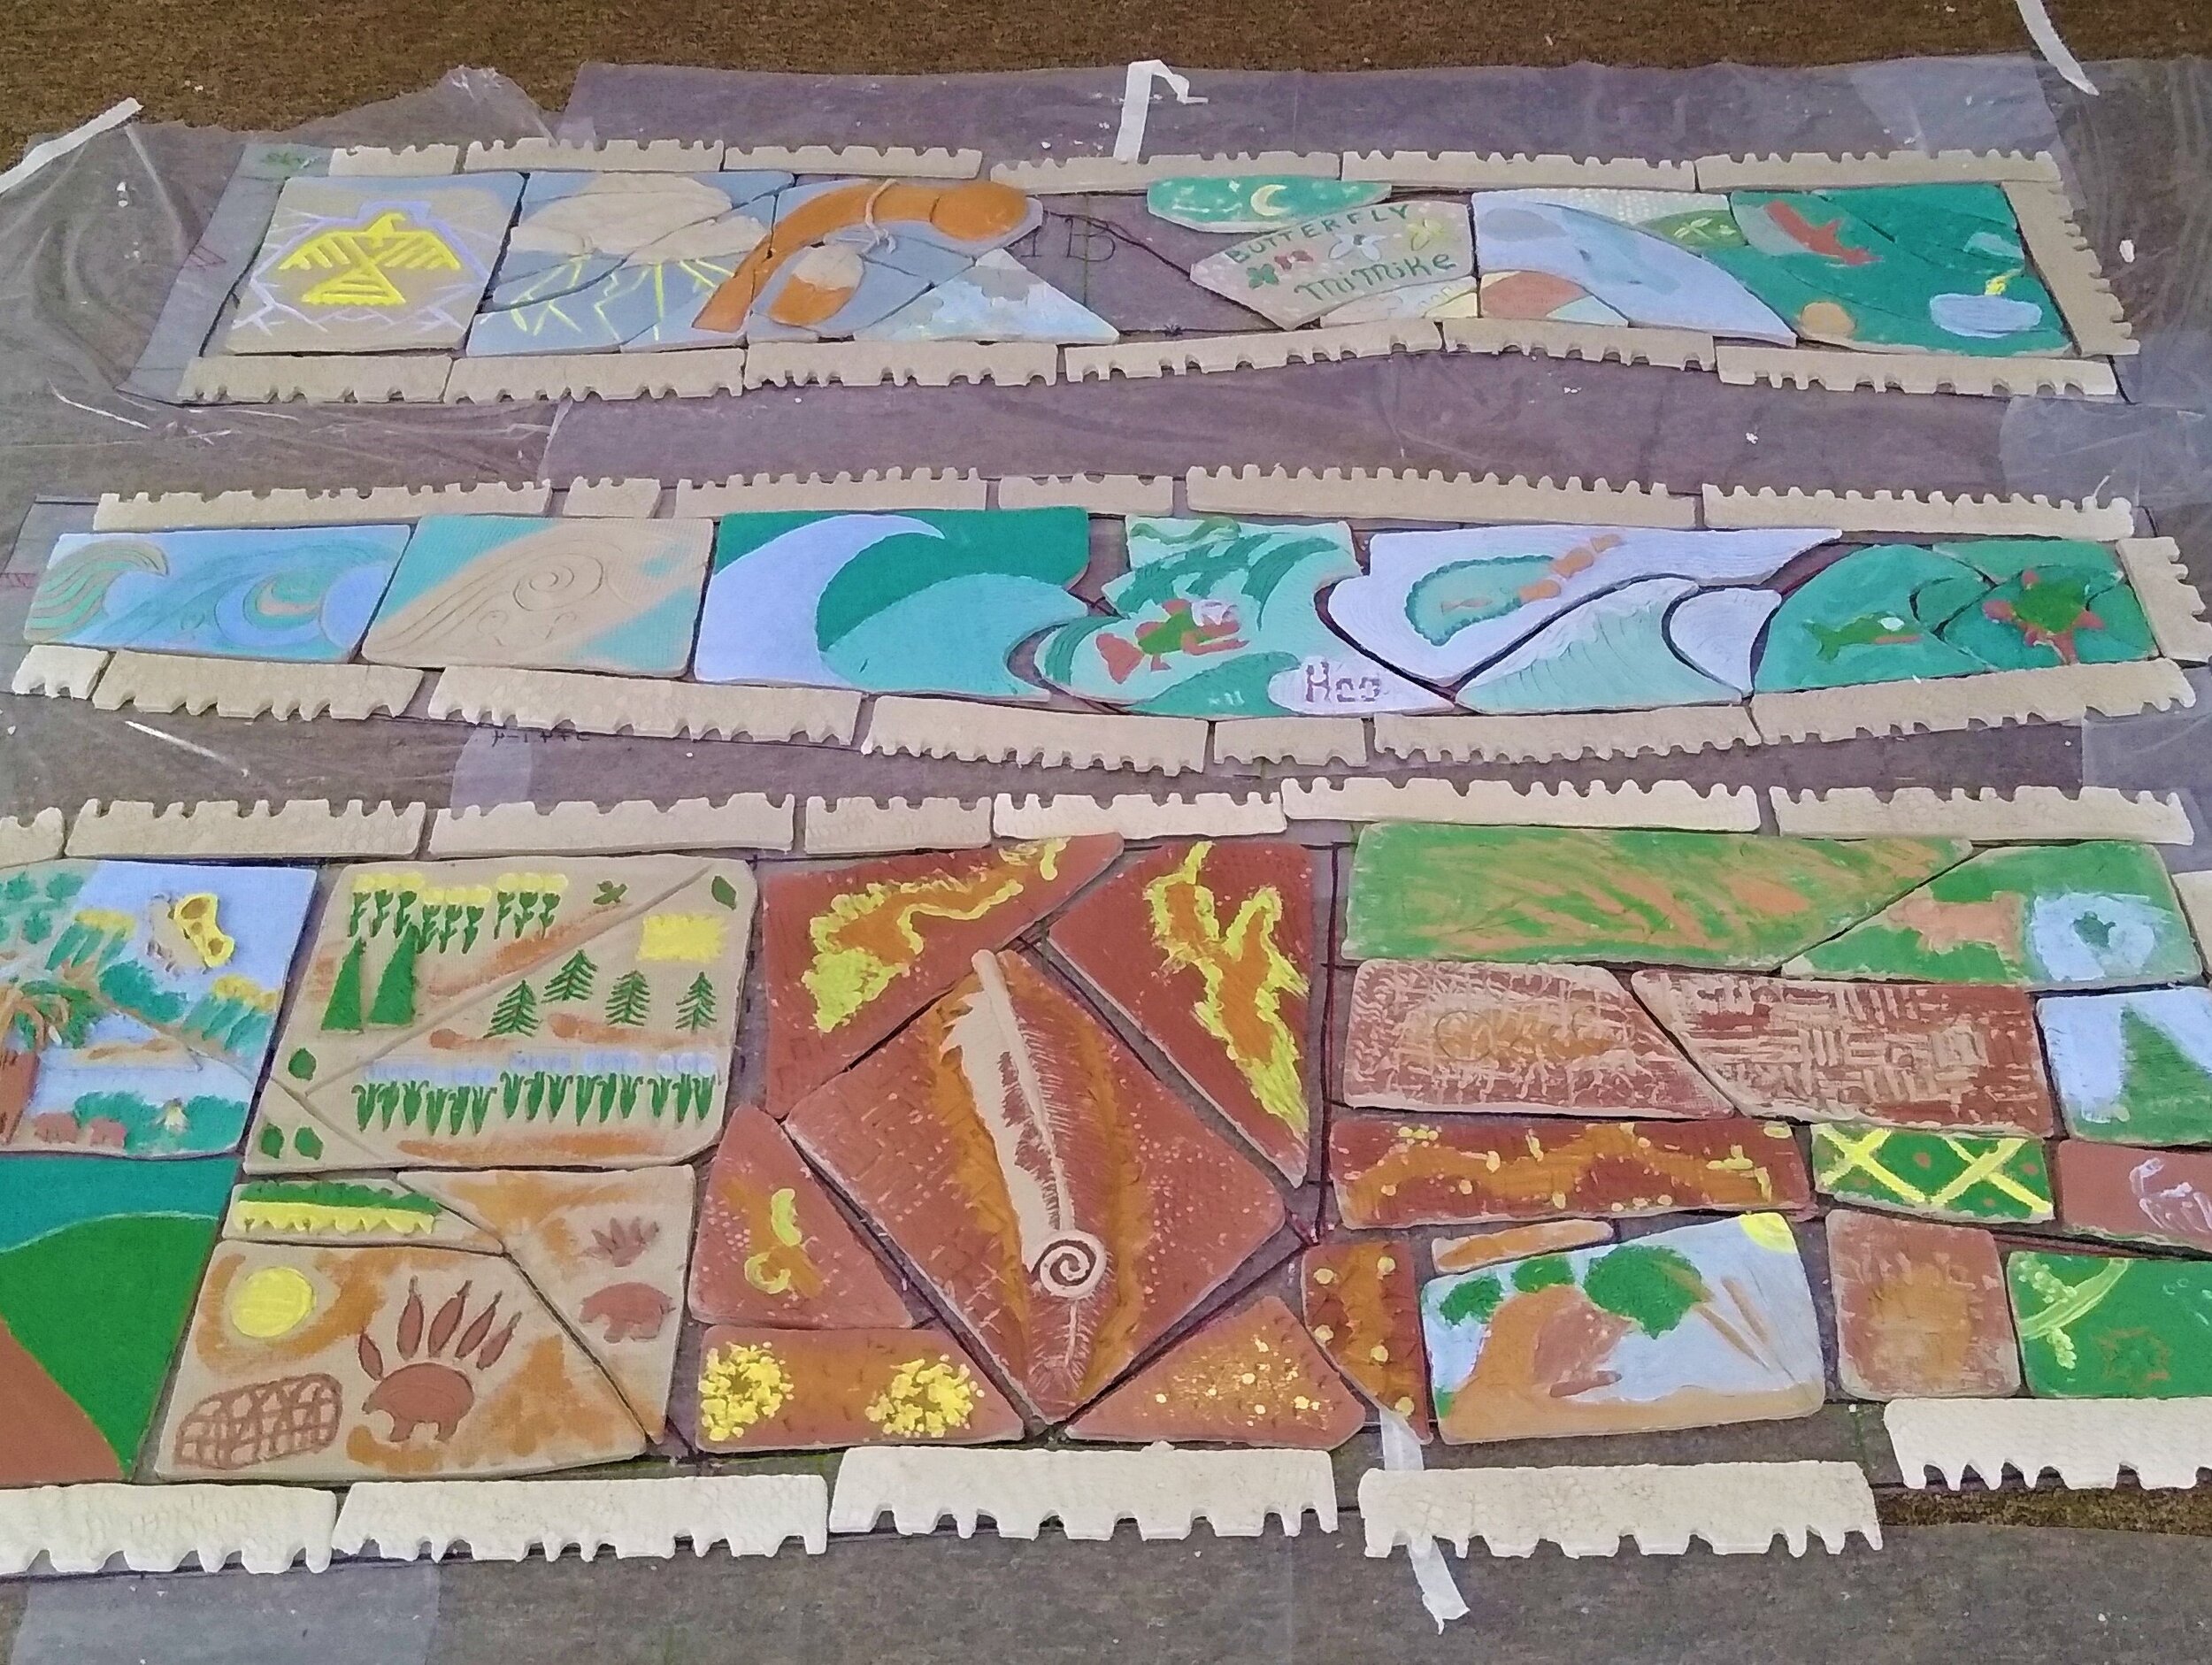  Some of the tiles for the mural strung together. 